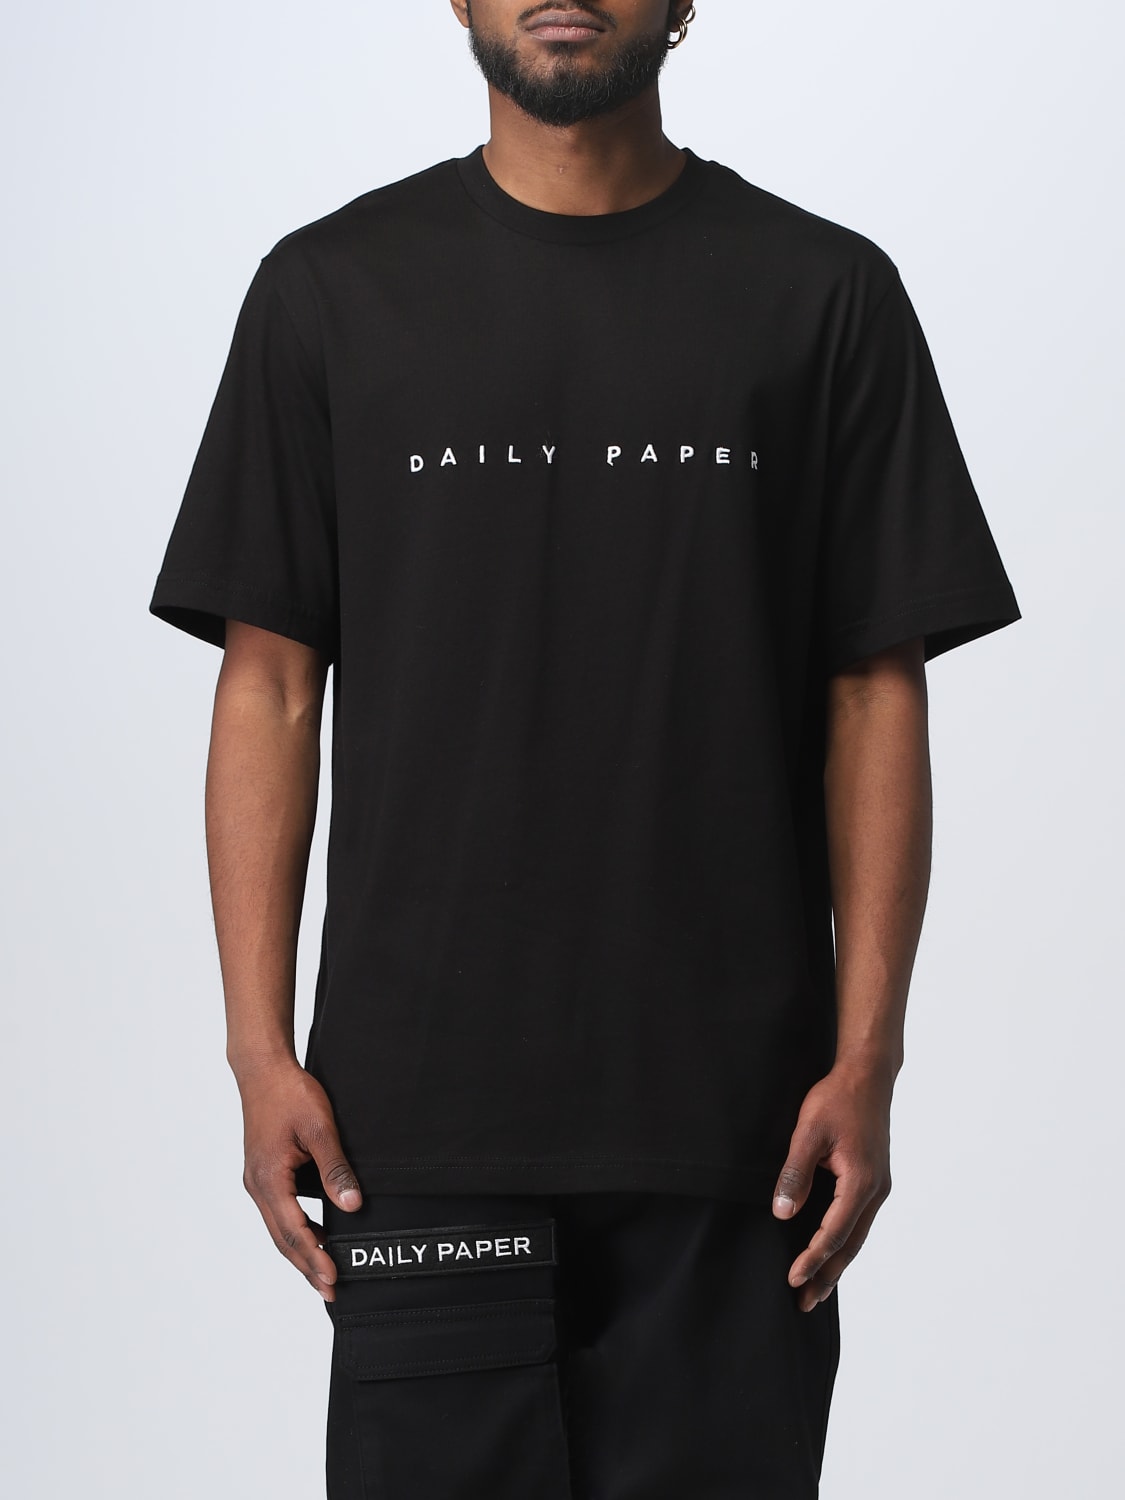 Fraude overzien verzonden DAILY PAPER: t-shirt for man - Black | Daily Paper t-shirt 2021181 online  on GIGLIO.COM